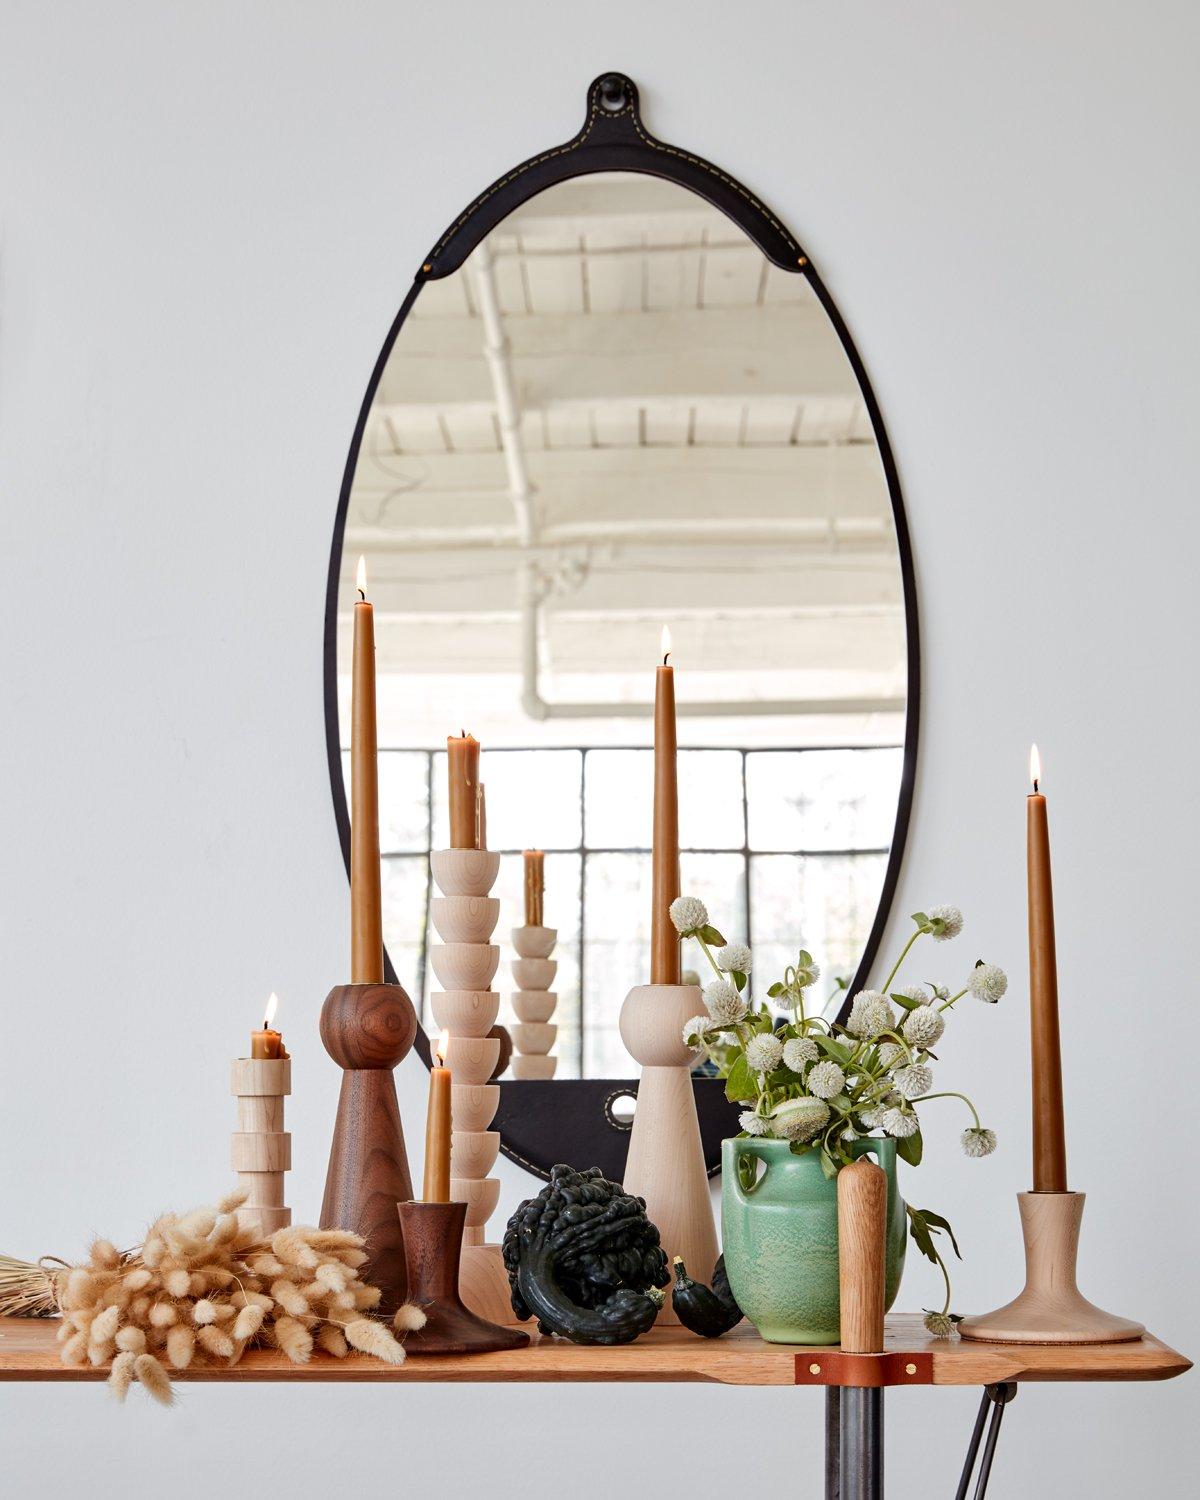 The Fairmount wide oval mirror is a hand-stitched leather mirror. Each piece of leather has its own character and variations lending to the appeal of the material. The mirror sits inside the frame like a pocket and comes with an iron hand hammered